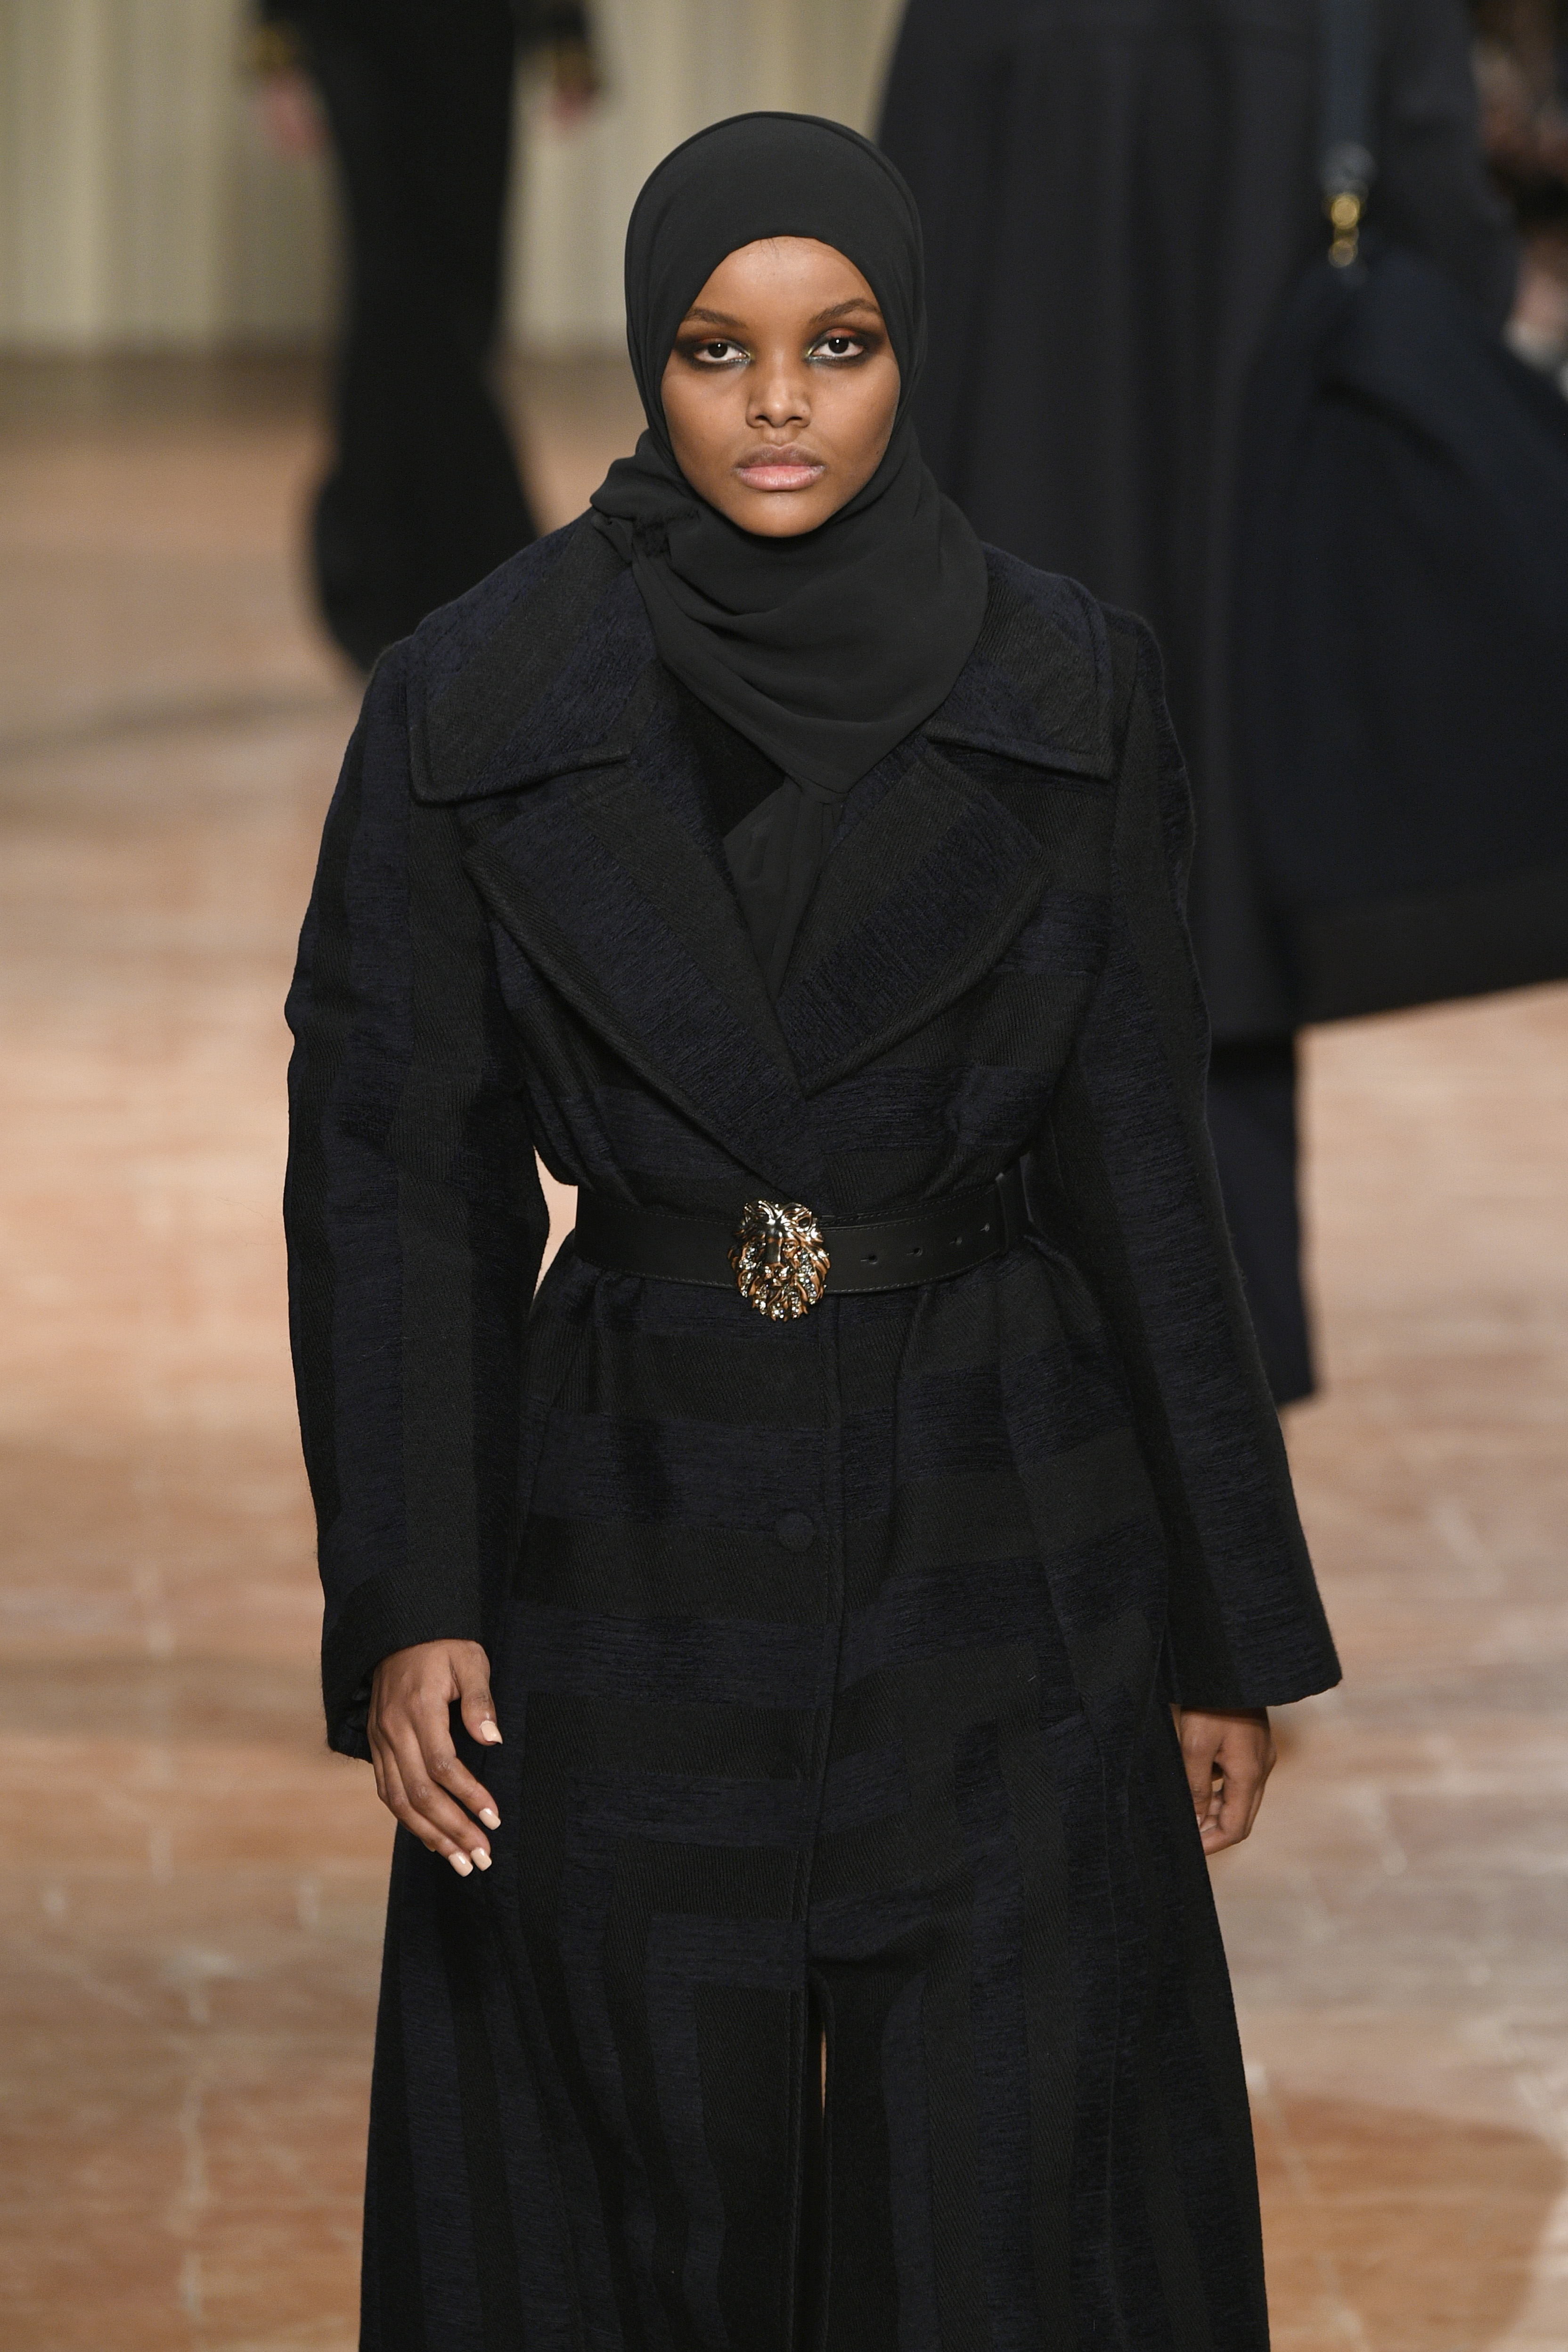 MILAN, ITALY - FEBRUARY 22:  Model Halima Aden walks the runway at the Alberta Ferretti show during Milan Fashion Week Fall/Winter 2017/18 on February 22, 2017 in Milan, Italy.  (Photo by Pietro D'aprano/Getty Images) (Pietro D'aprano—Getty Images)